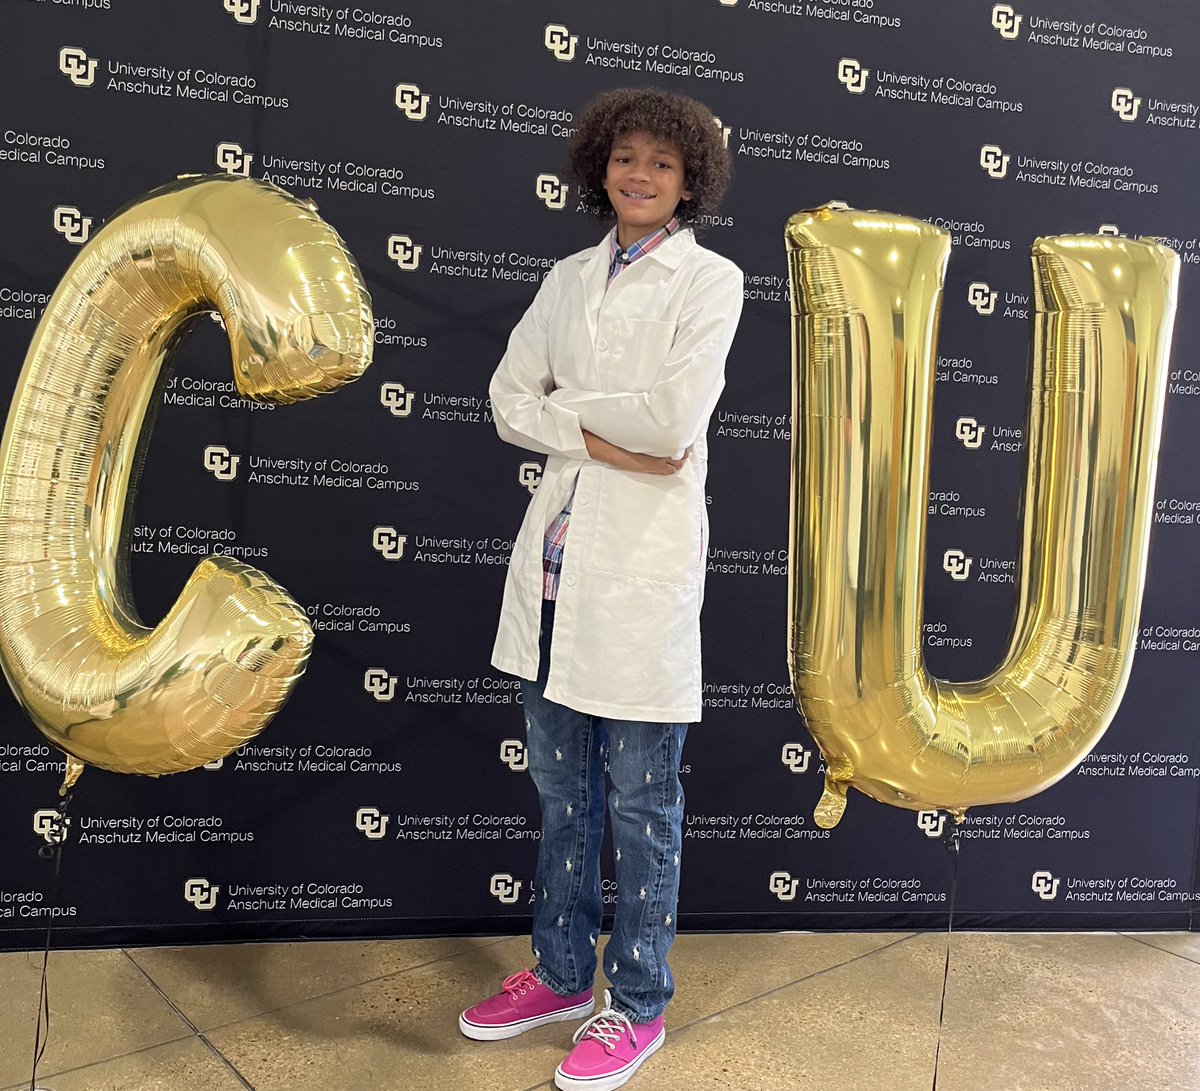 Today 200 students, families & teachers experienced a peek into their future in healthcare w/ the @TeamBMWC & @CUMedicalSchool Youth Summit! To see the future of medicine is inspiring! The wonder, curiosity & excitement of our participants reminds us of our WHY! #ATCUWeSeeYou!